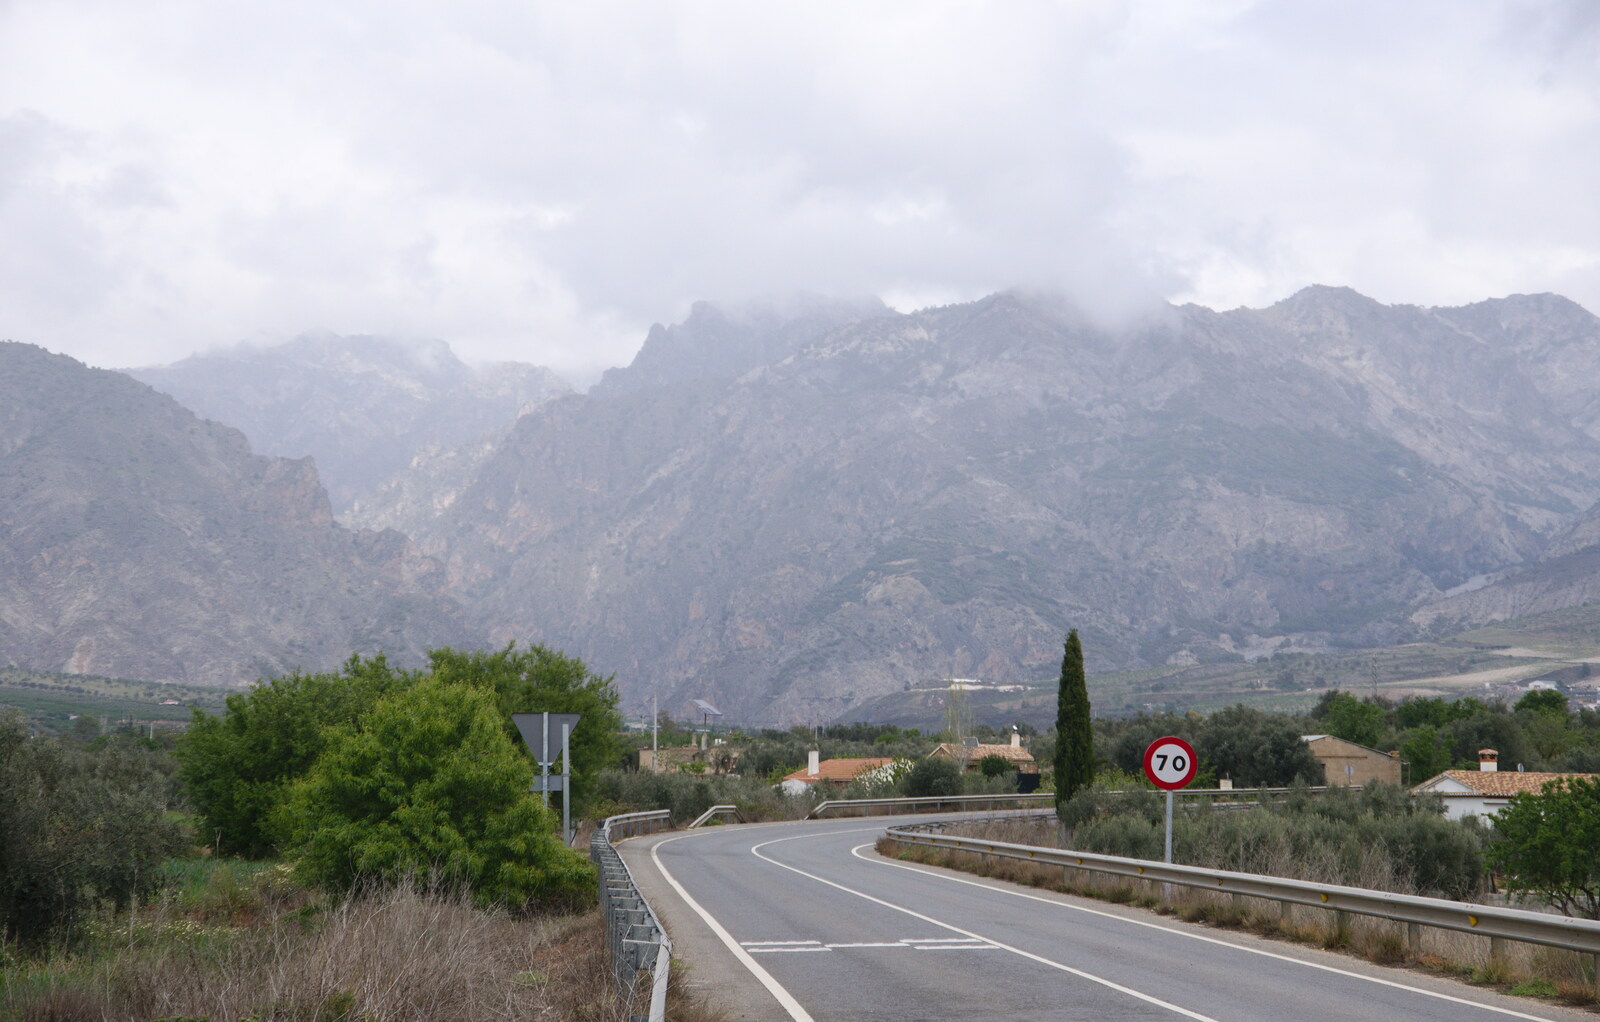 More mountains and empty roads from A Walk up a Hill, Paella on the Beach and Granada, Andalusia, Spain - 19th April 2018